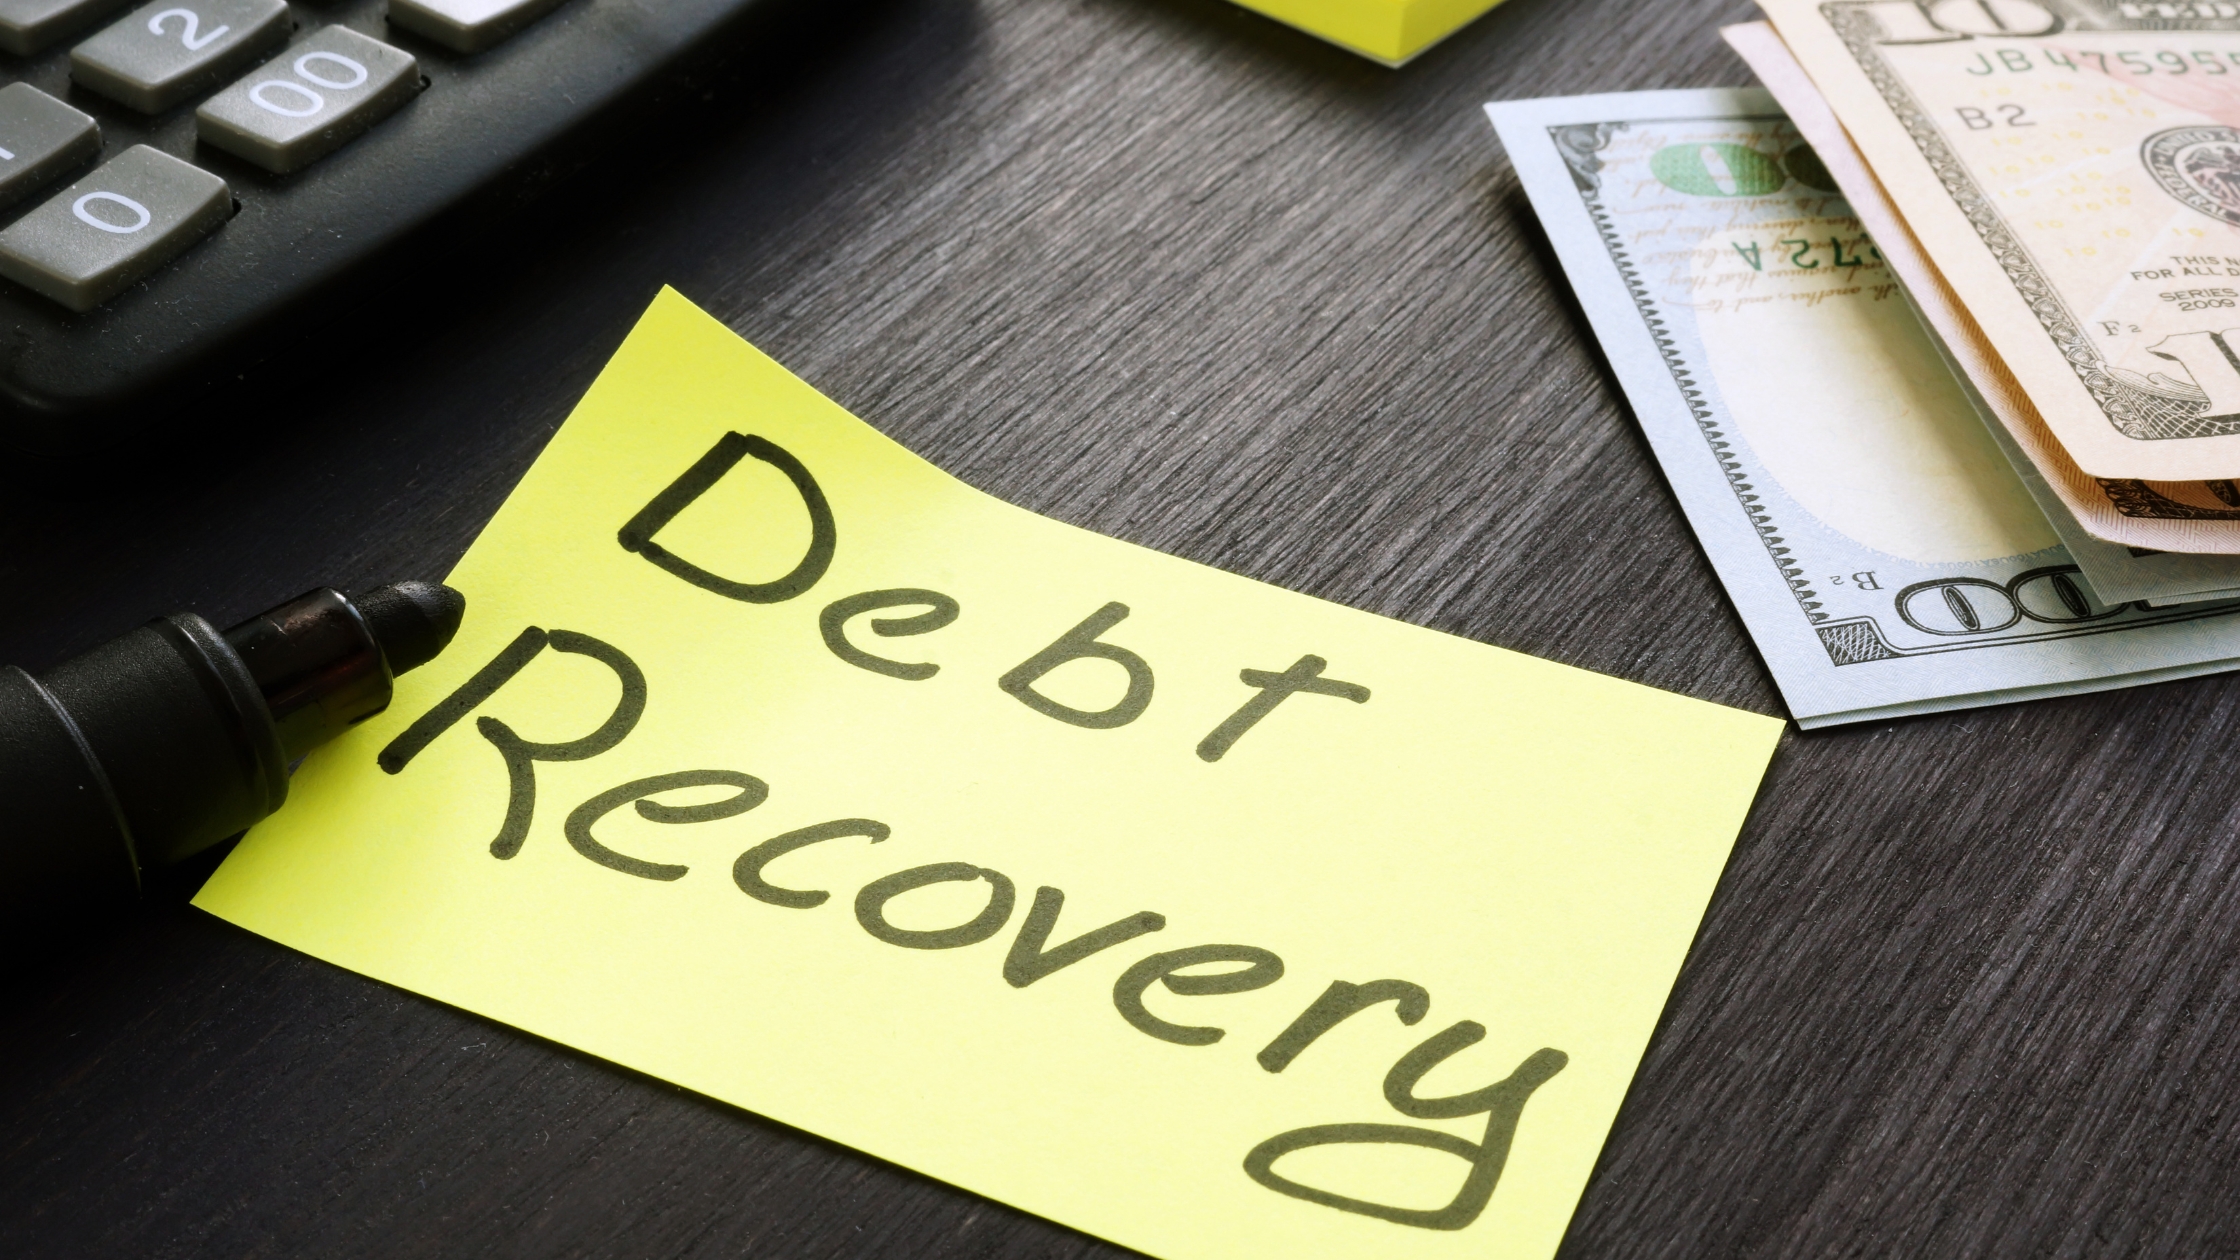 Sticky note with "Debt Recovery" written on it placed on a desk next to a calculator.